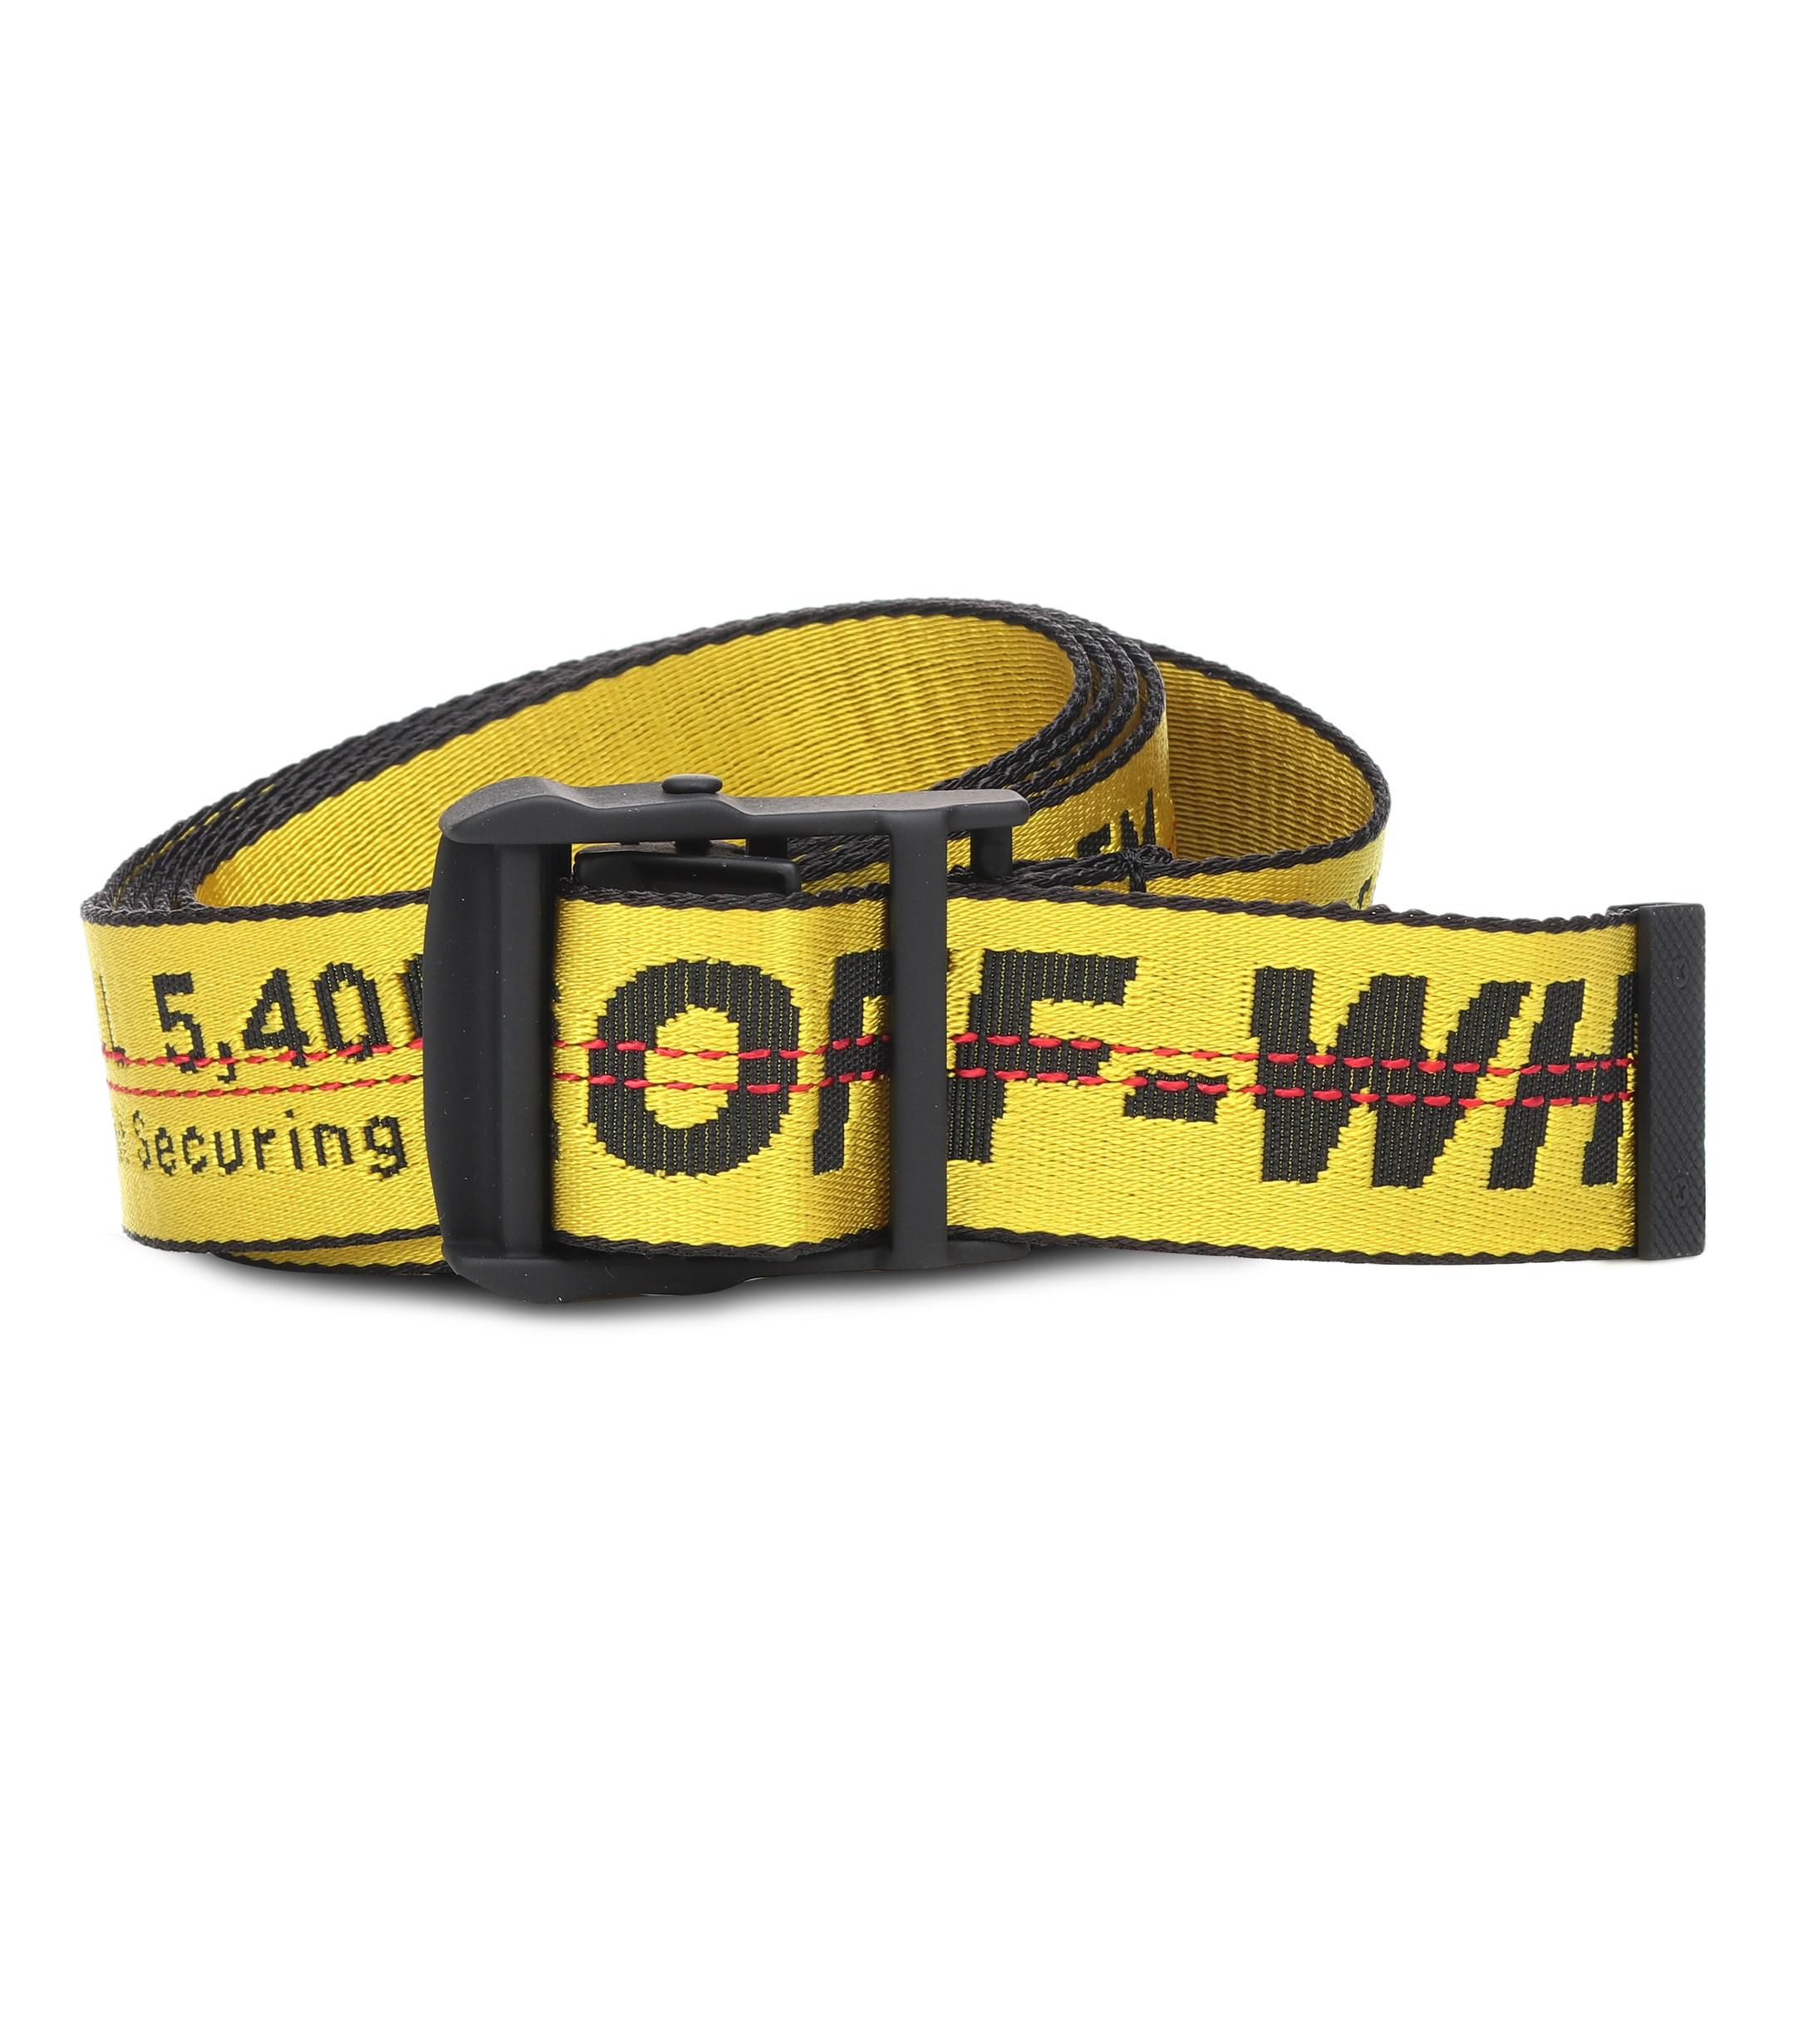 Off-White c/o Virgil Abloh Synthetic Industrial Belt in Yellow - Lyst